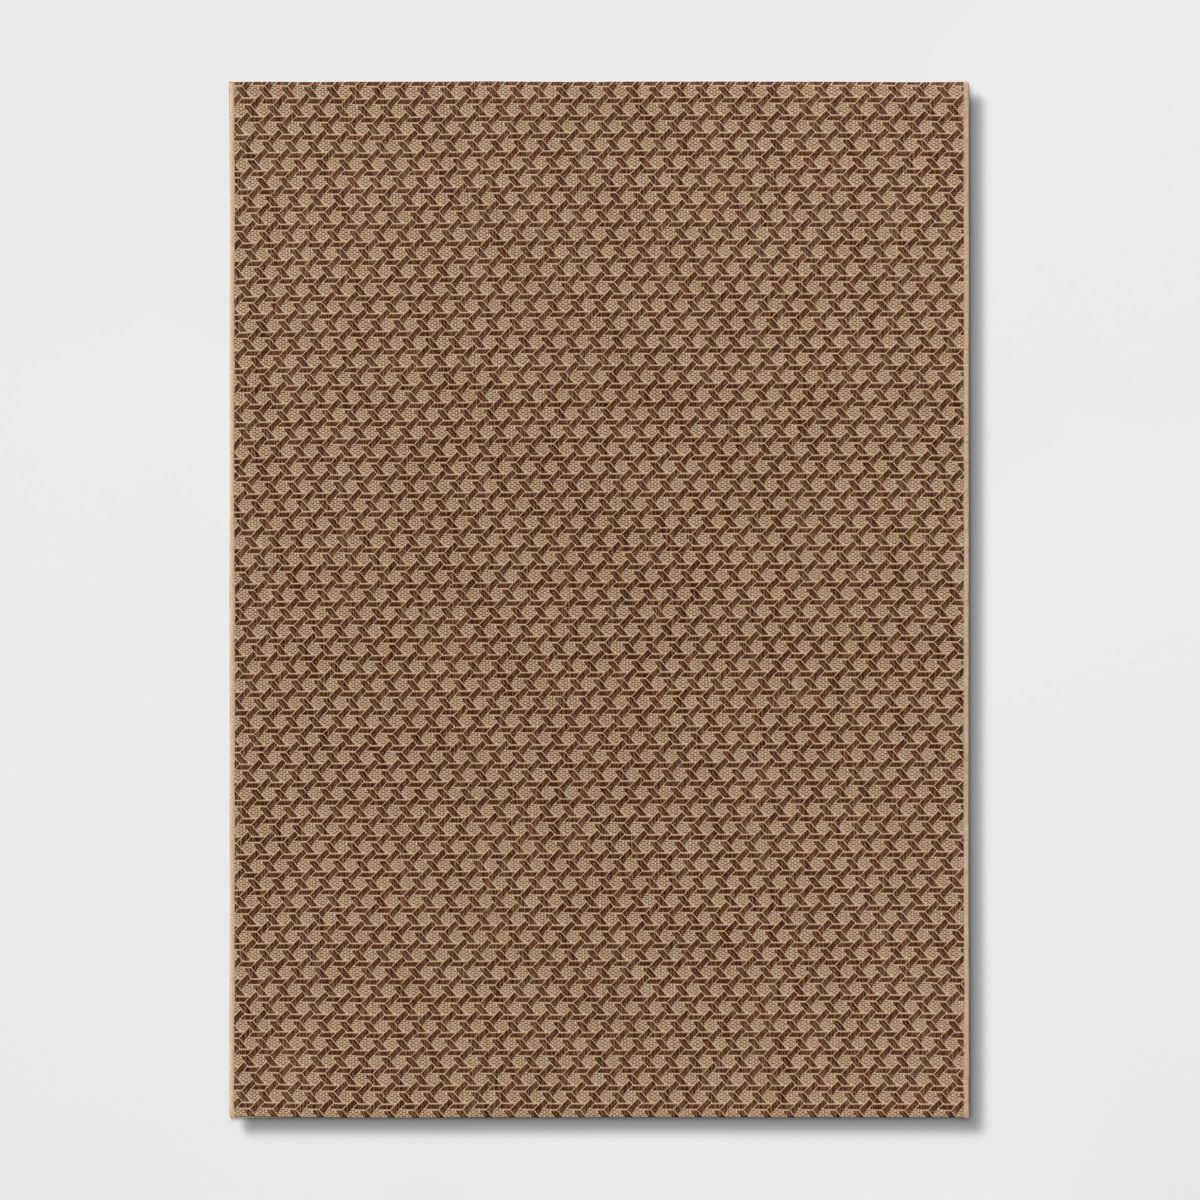 5'3"x7' Cane Weave Outdoor Rug Tan - Threshold™ | Target